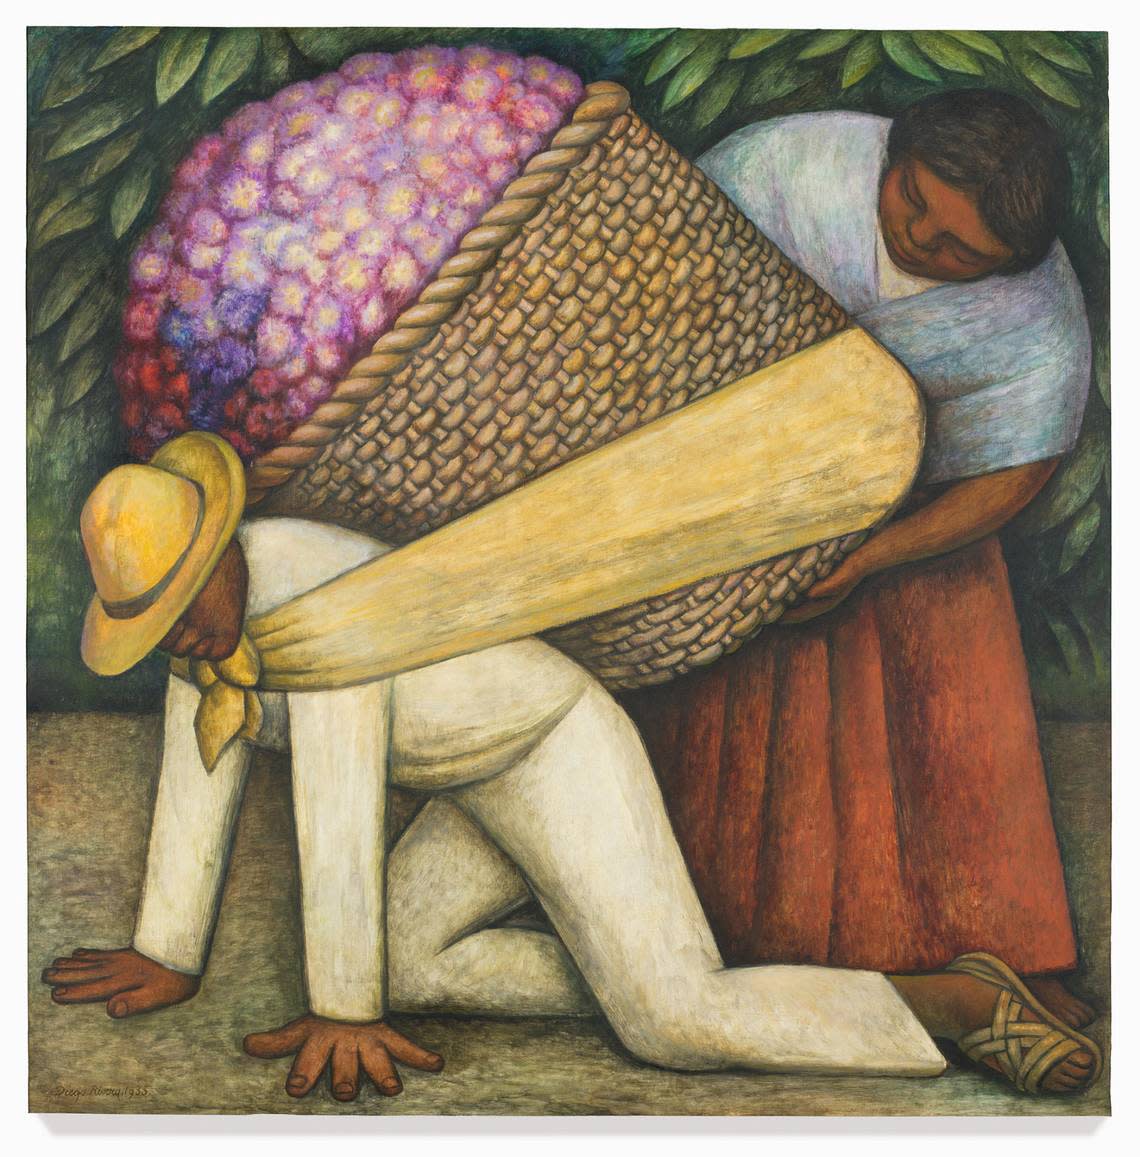 “Diego Rivera’s America” is on display through July 31 at Crystal Bridges Museum of American Art in Bentonville, Ark. “Diego Rivera’s America,” through July 31, Crystal Bridges Museum of American Art, Bentonville, Ark.:/Courtesy photo